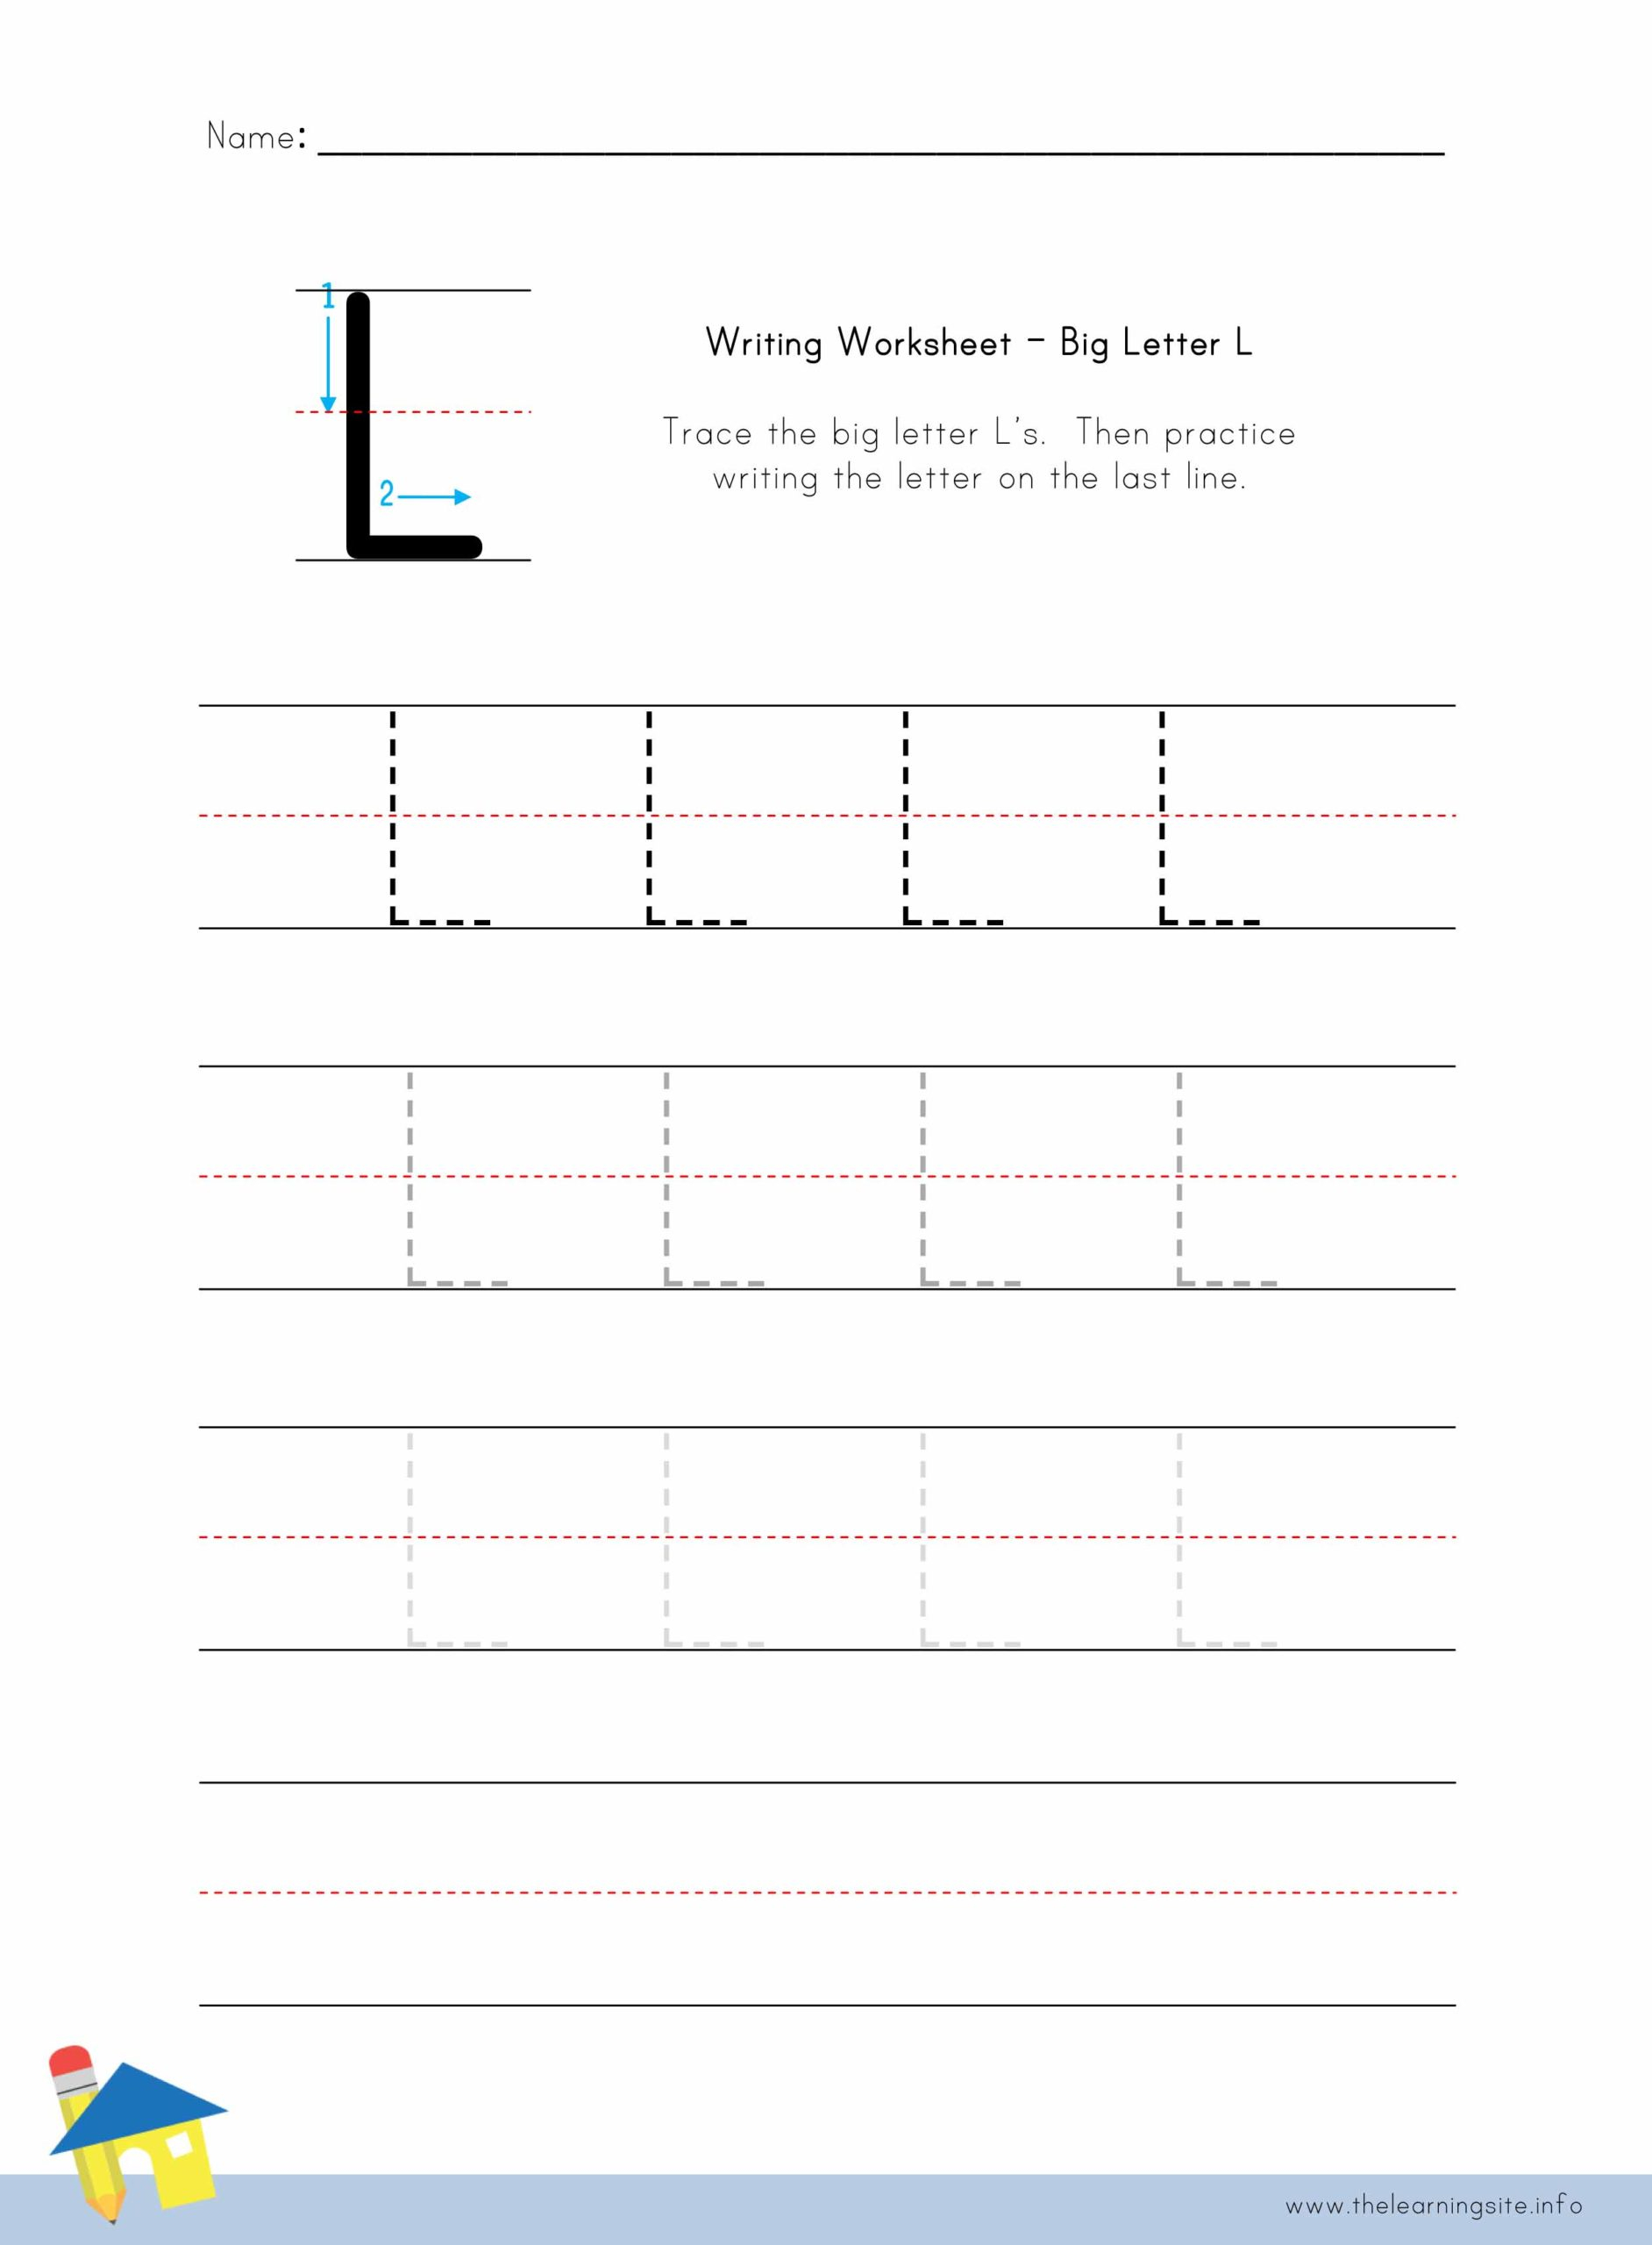 Big Letter L Writing Worksheet The Learning Site